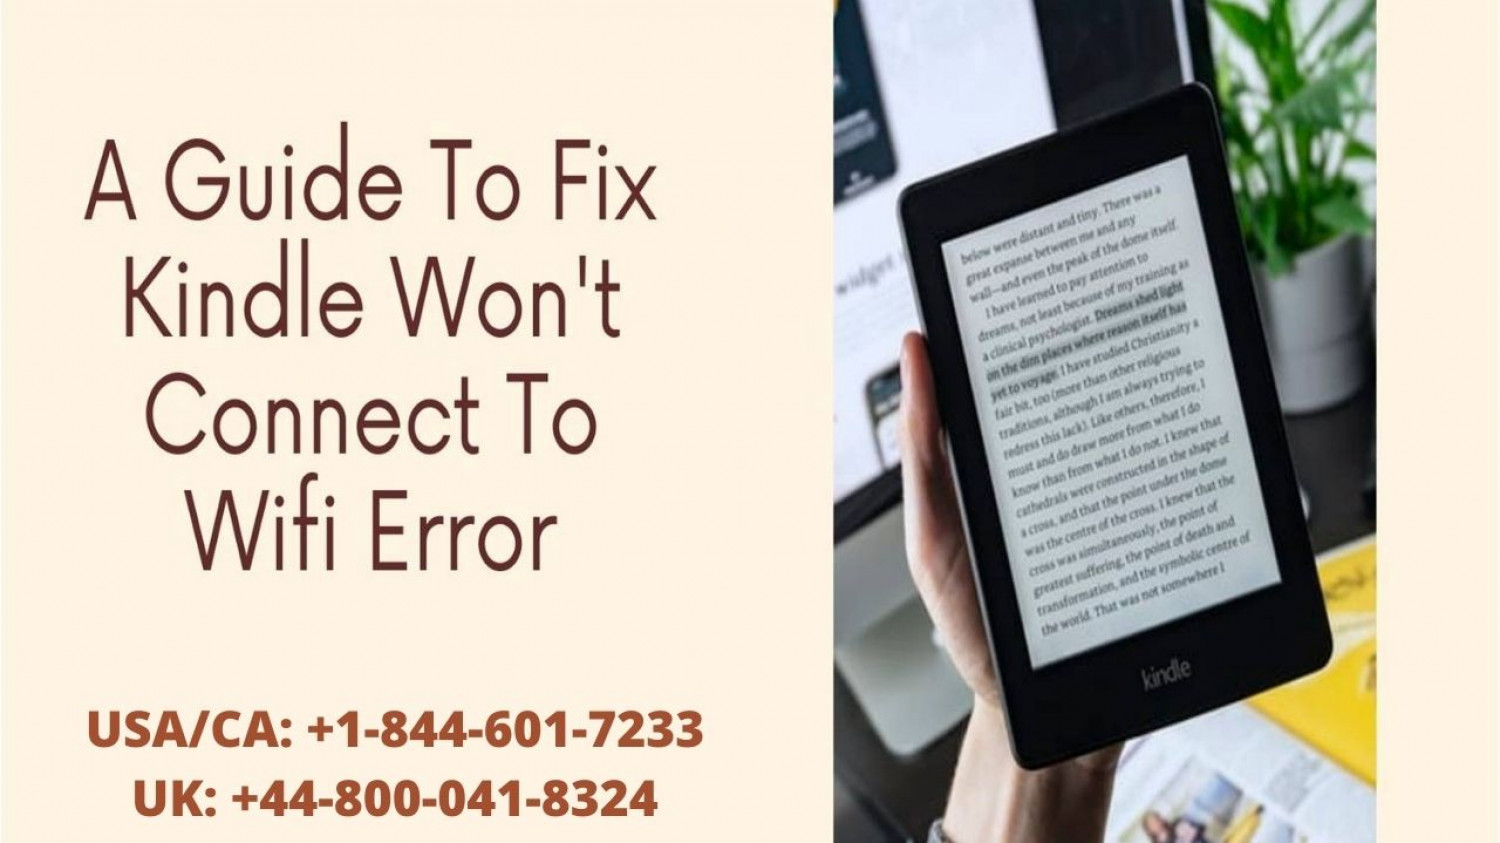 How To Fix Kindle Won’t Connect To Wifi Error? Call +1–844-601-7233 Infographic